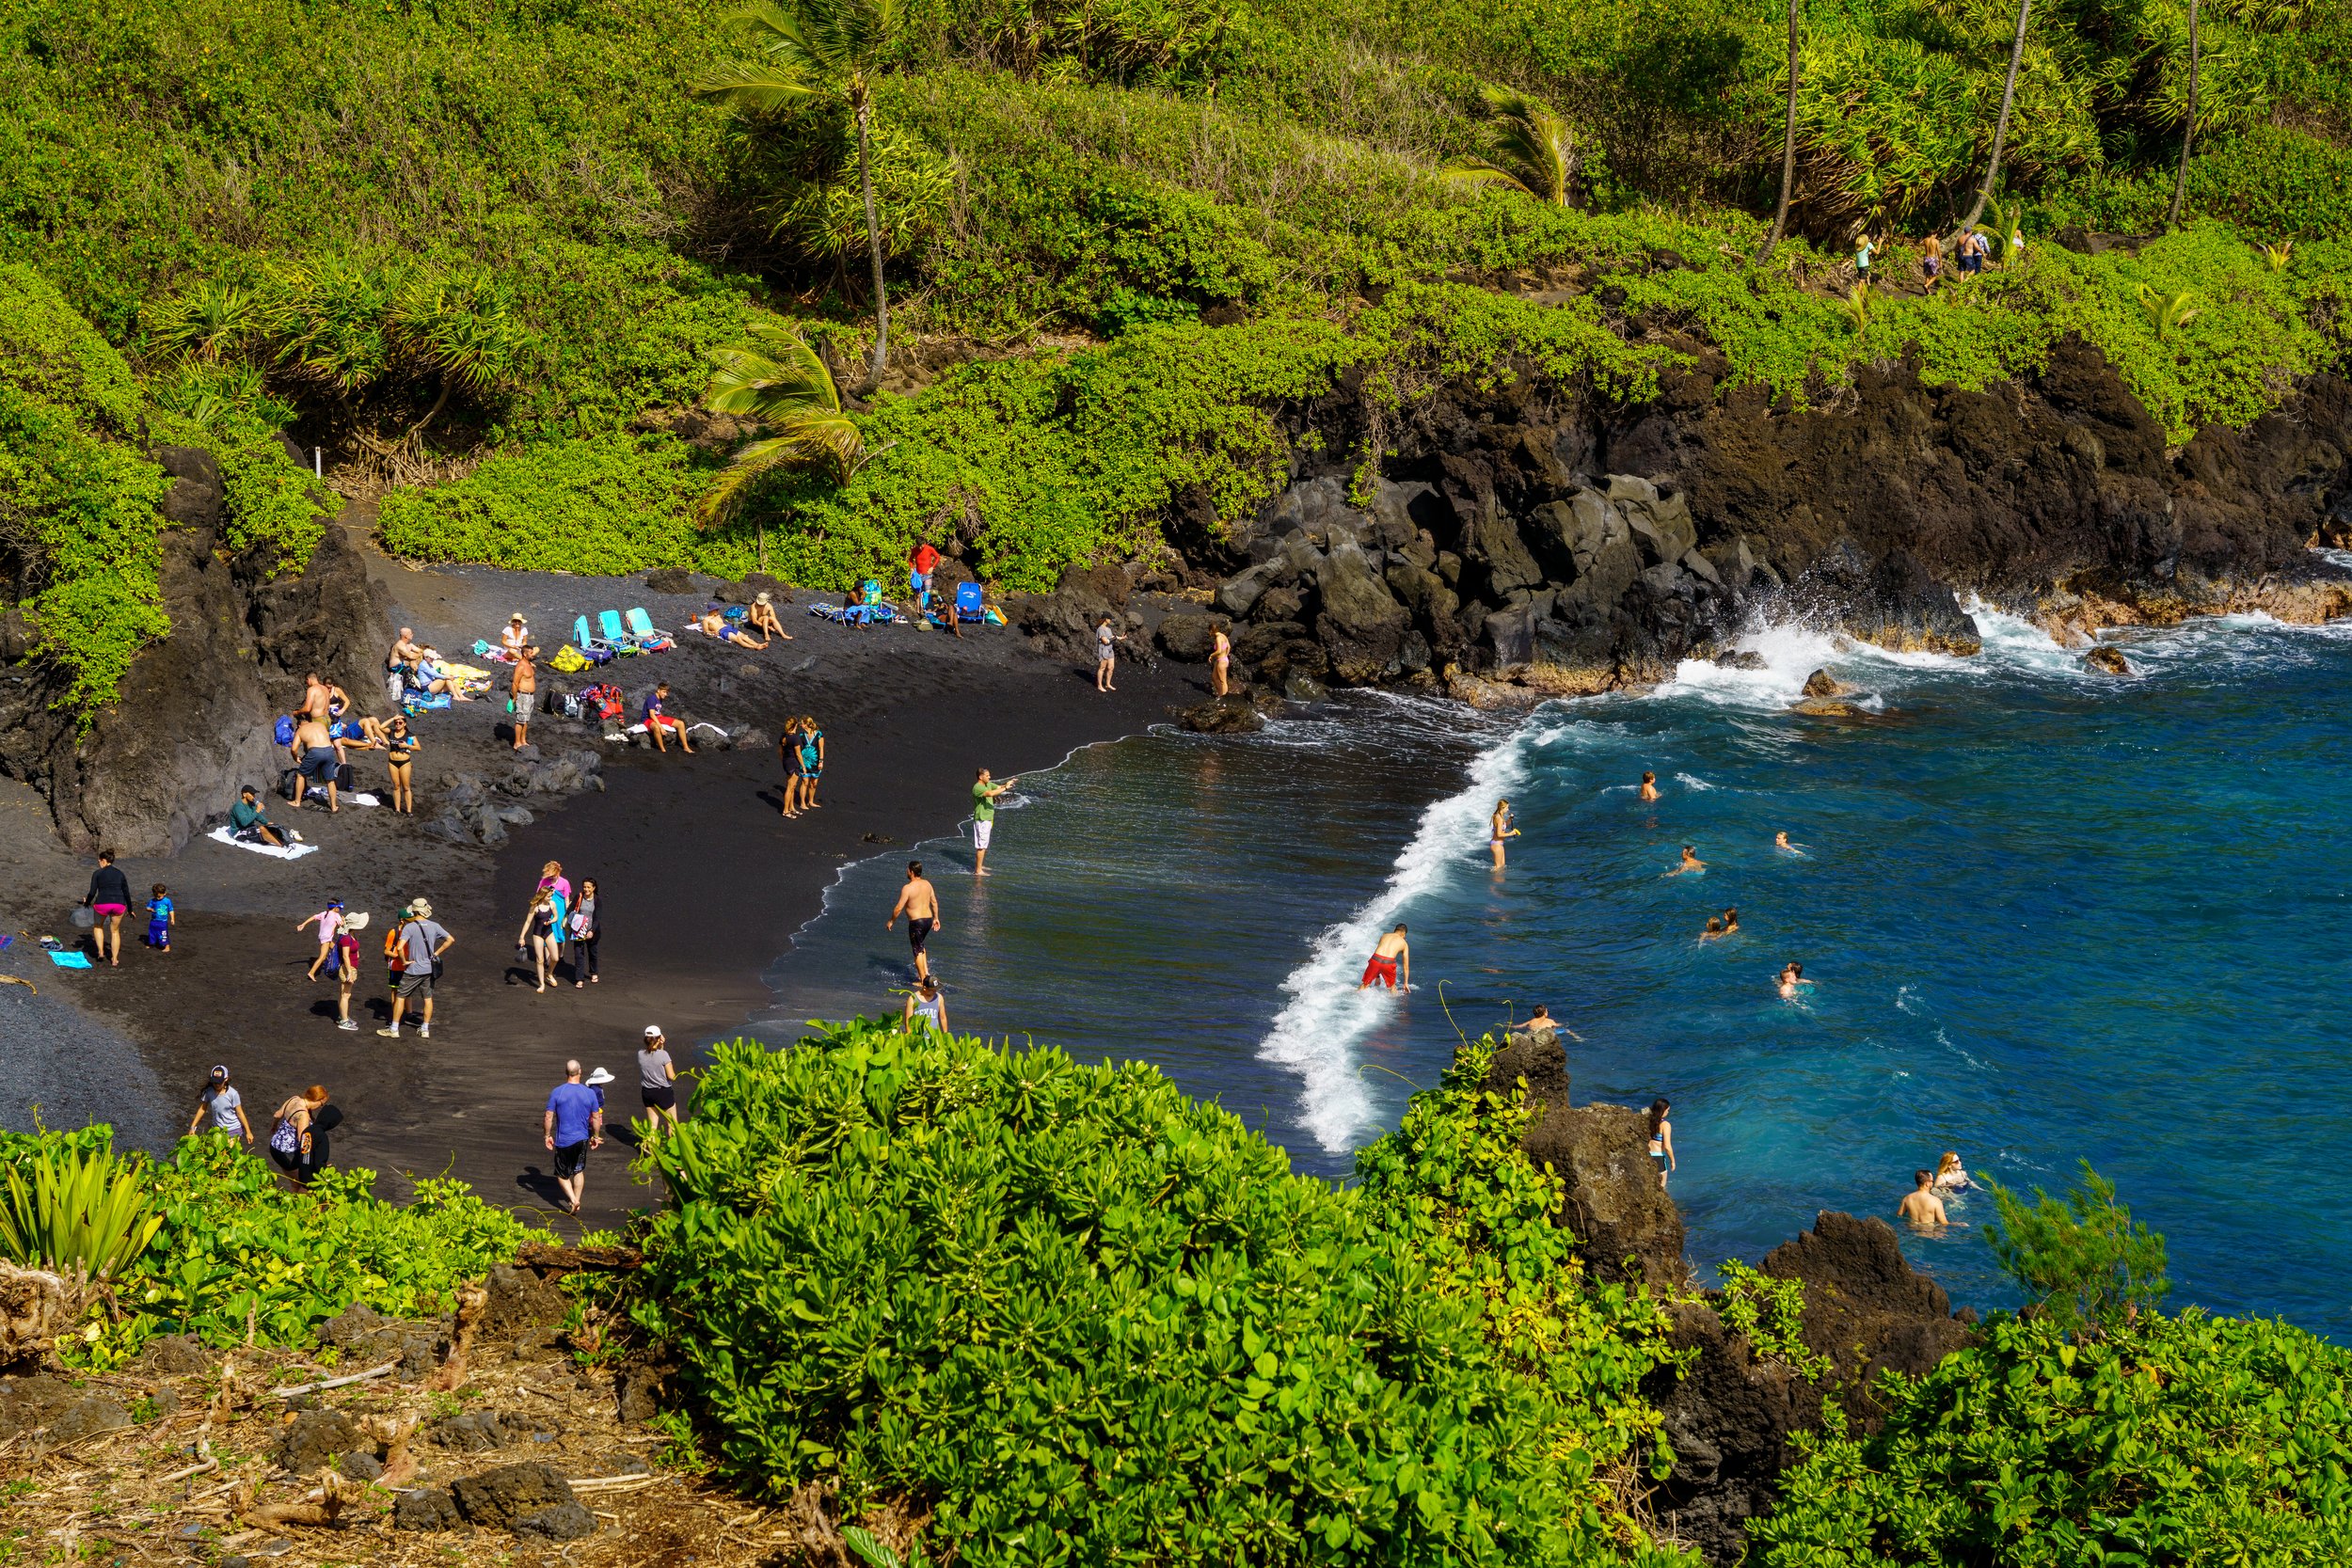  The somewhat crowded black sand beach 